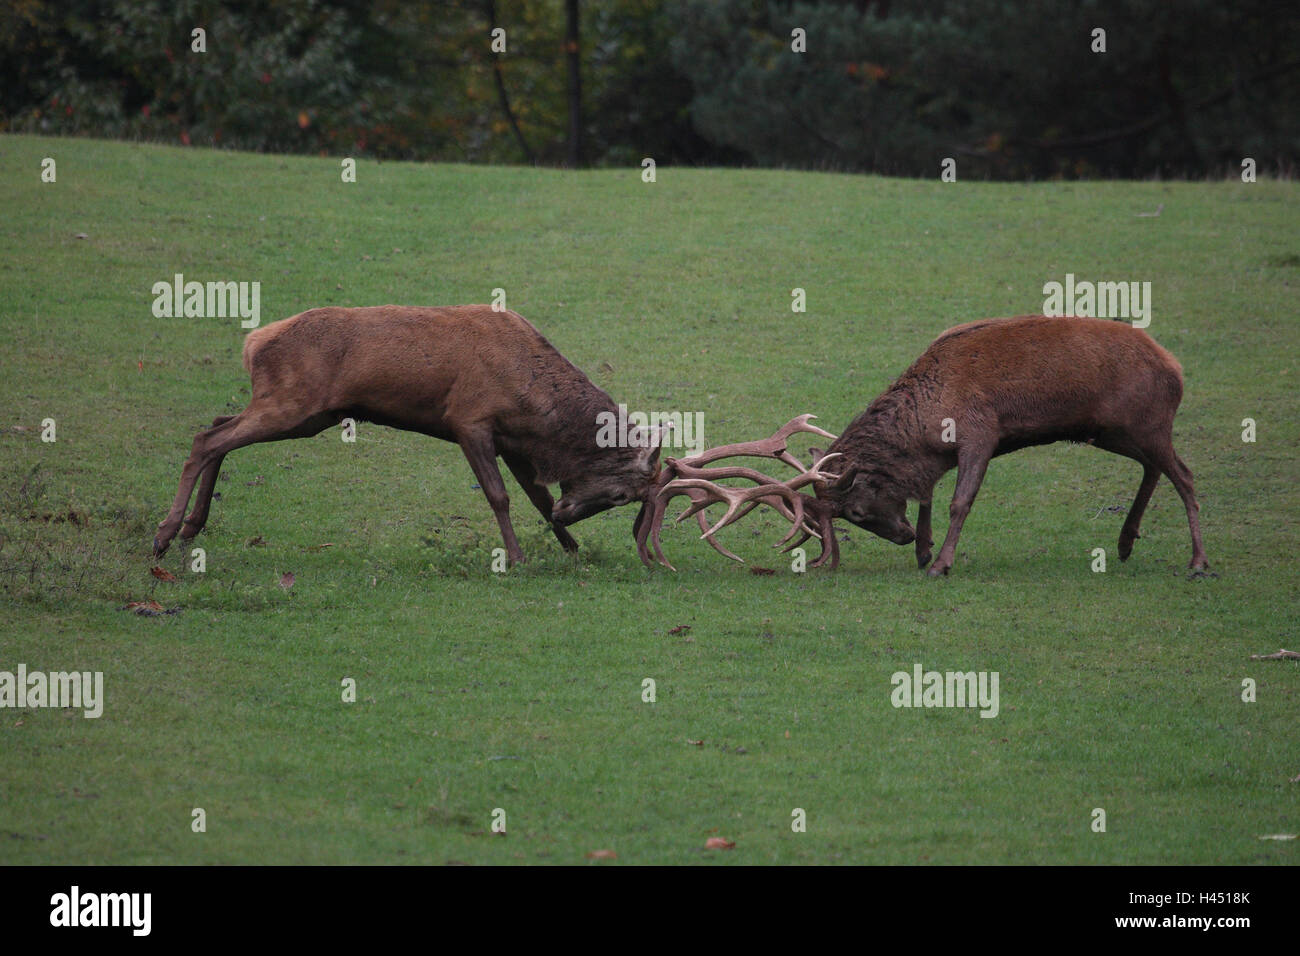 Red deer, fight, animals, wild animals, game, red deer, two, manly, side view, fight, struggle for power, rutting season, force fairs, antlers, deer antlers, meadow, red deer, deer, Cervidae, fight, rut, autumn, Stock Photo